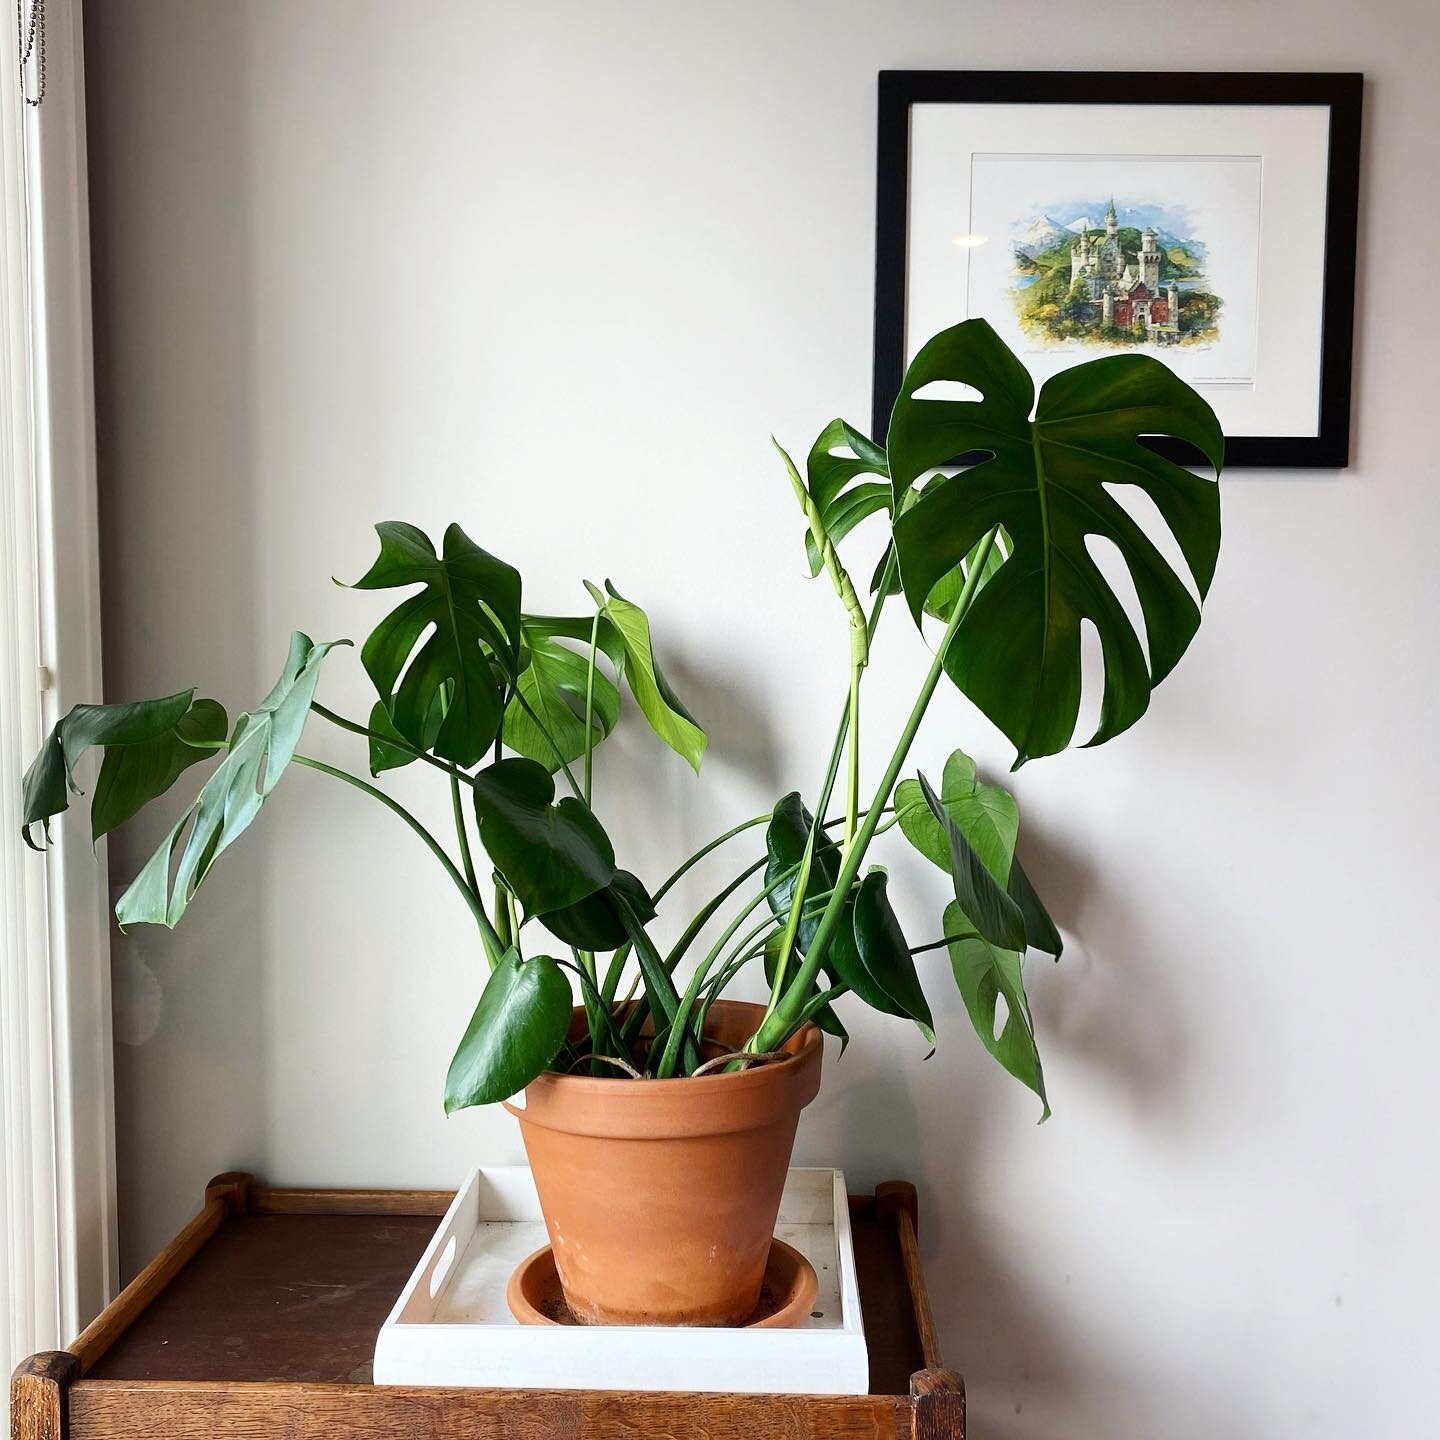 I&rsquo;ve always liked plants but I wasn&rsquo;t great at taking care of them until my green thumb husband was deployed last spring. Before he left he said, &ldquo;Don&rsquo;t kill the plants!&rdquo; And shortly after, I discovered @houseplusplant t